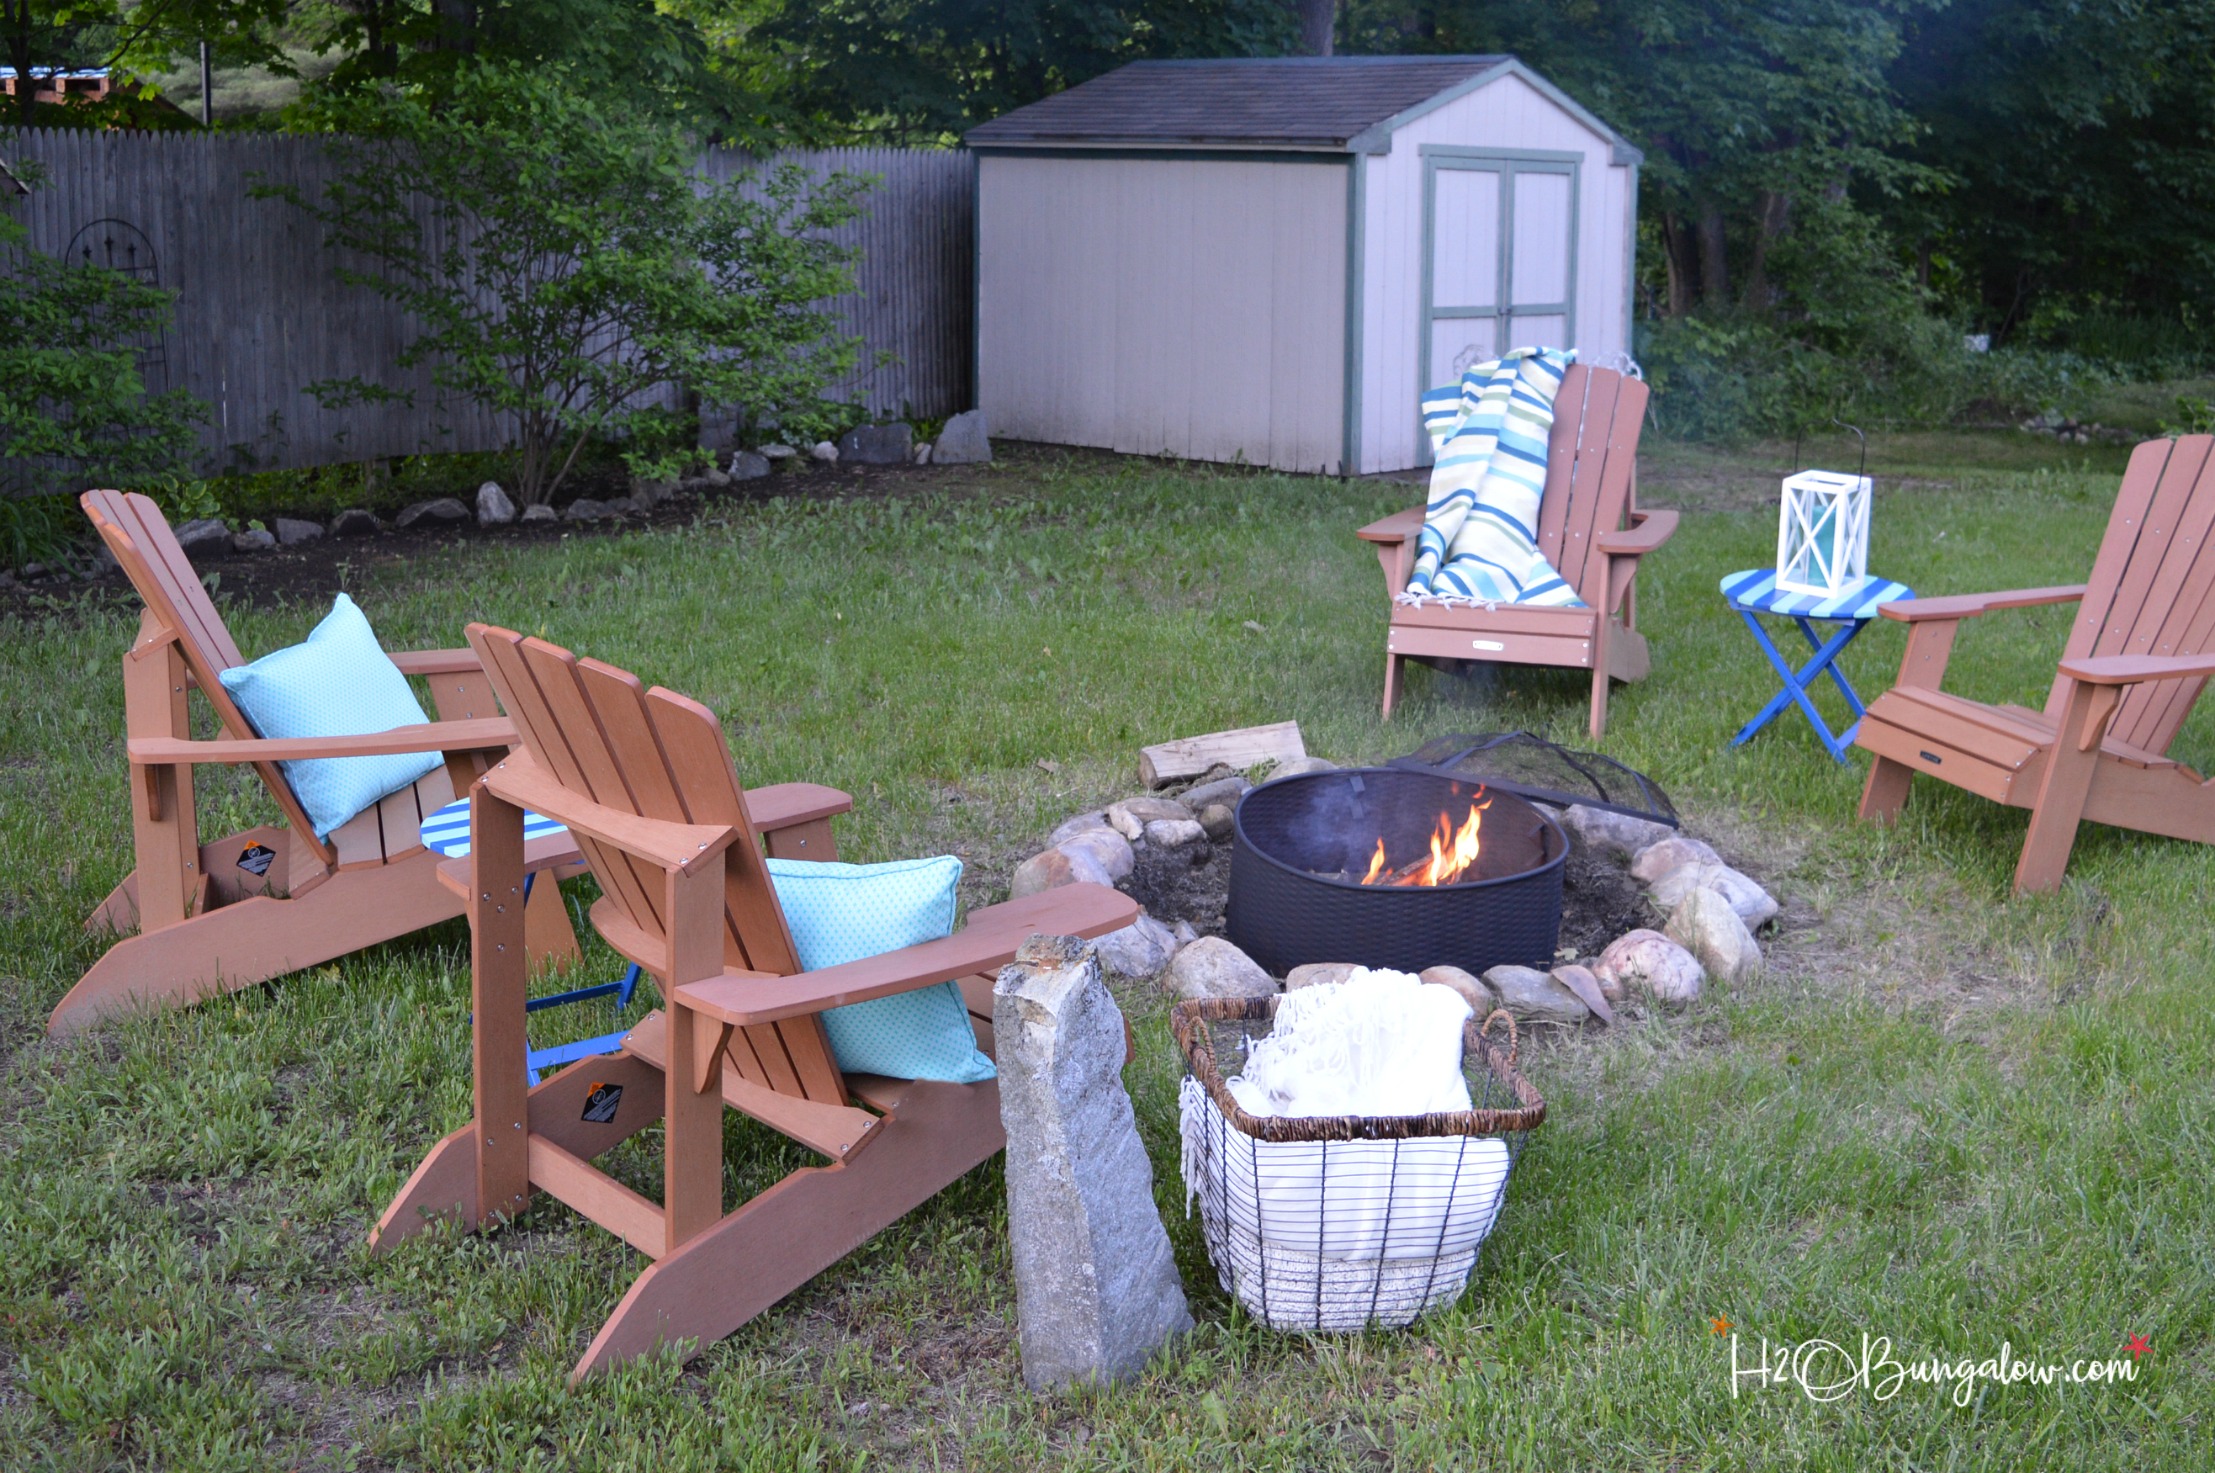 Create a cozy outdoor space with these 6 must have fire pit decorating ideas. Tips on how to decorate your backyard with color to seating to accessories. Find over 450 DIY home decor and home improvement tutorials on H2OBungalow.com